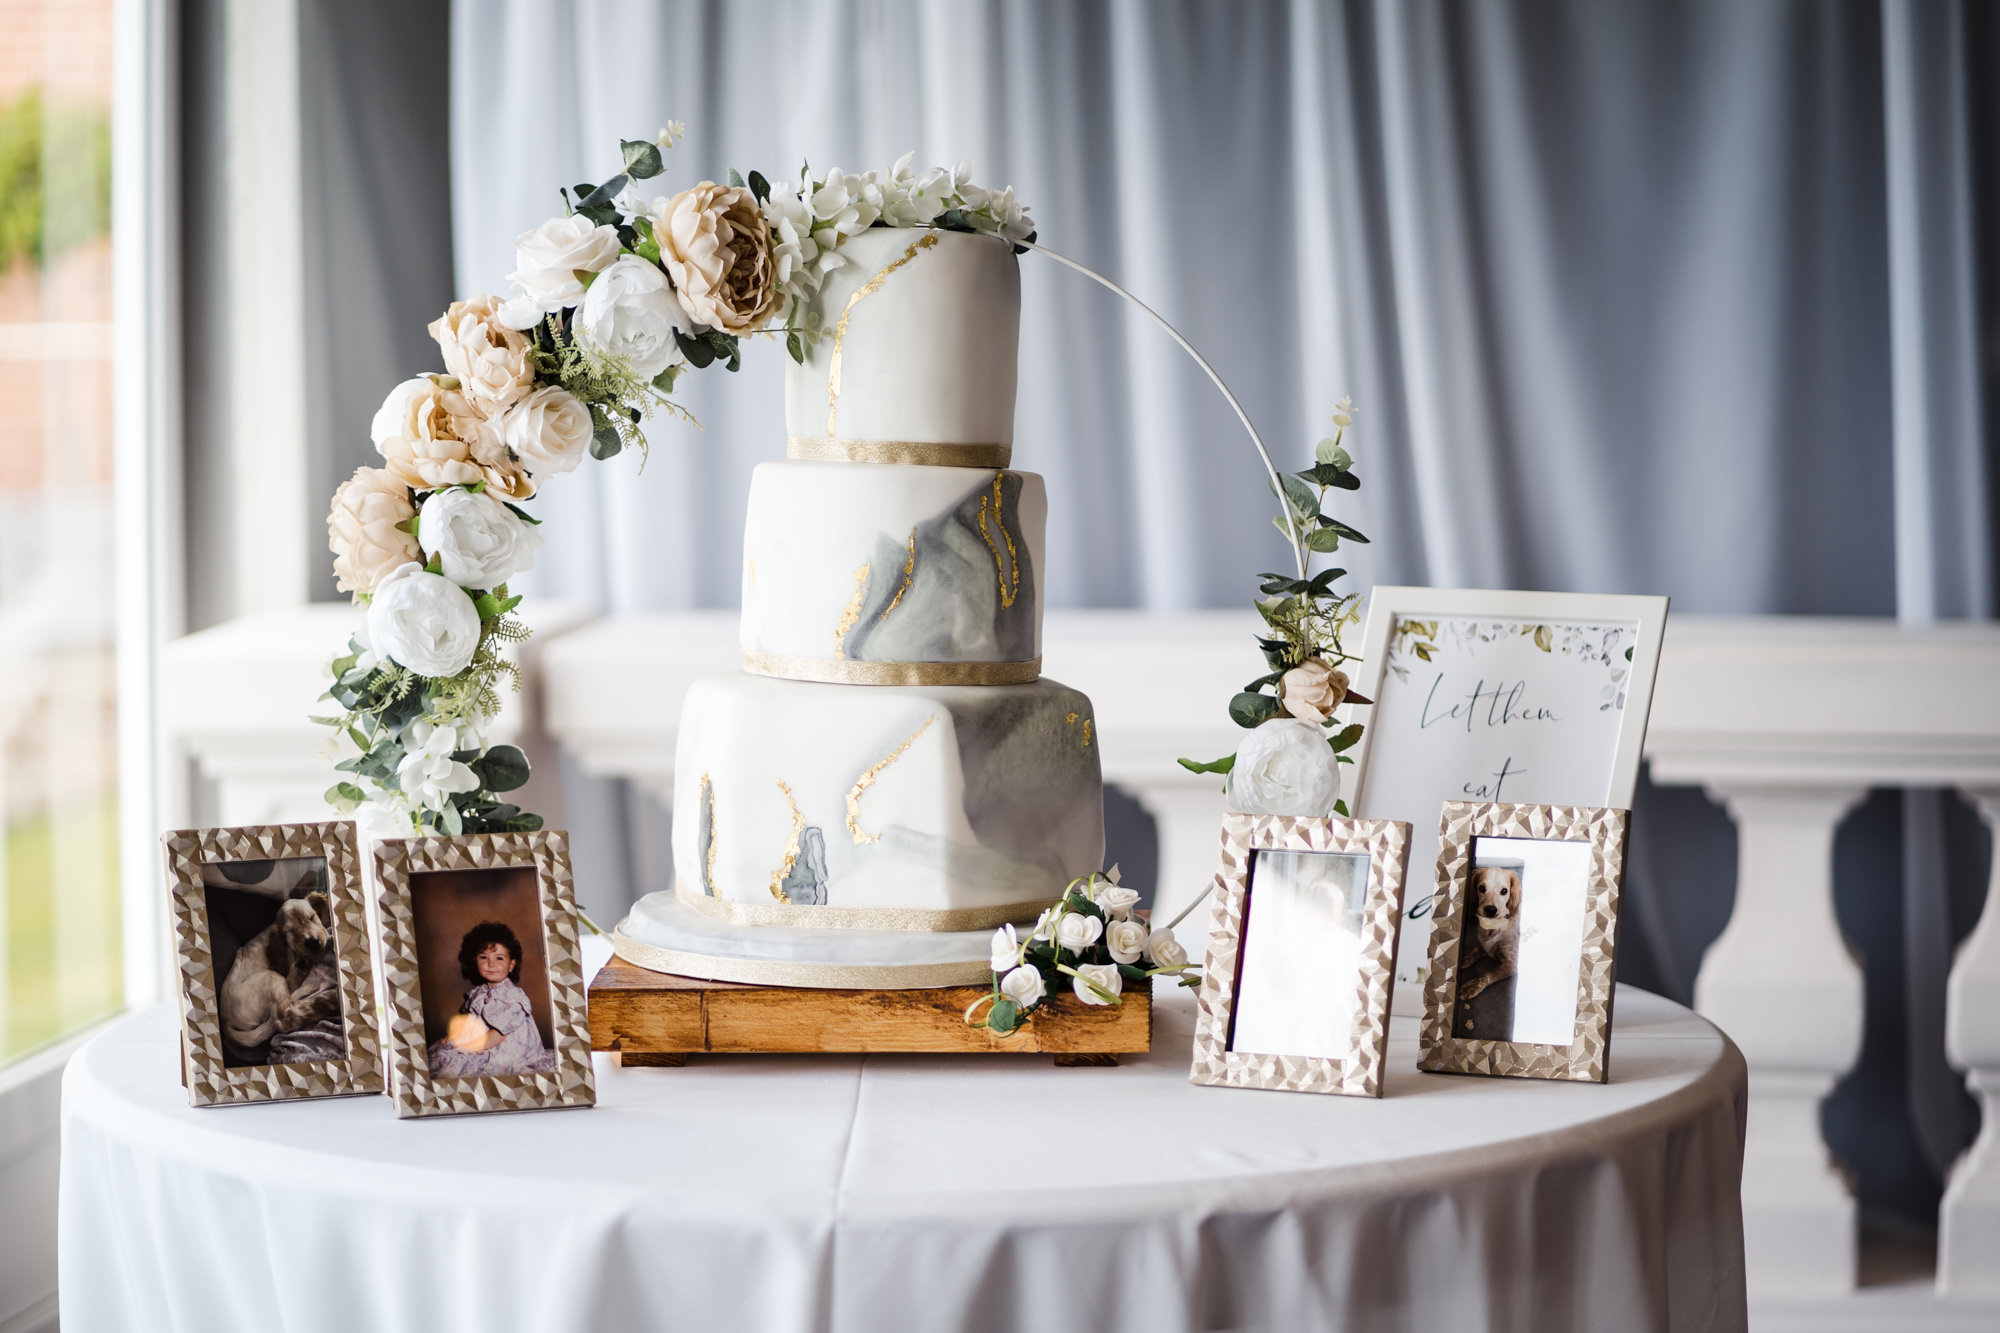 wedding cake with gold and grey details surround by a flower arch